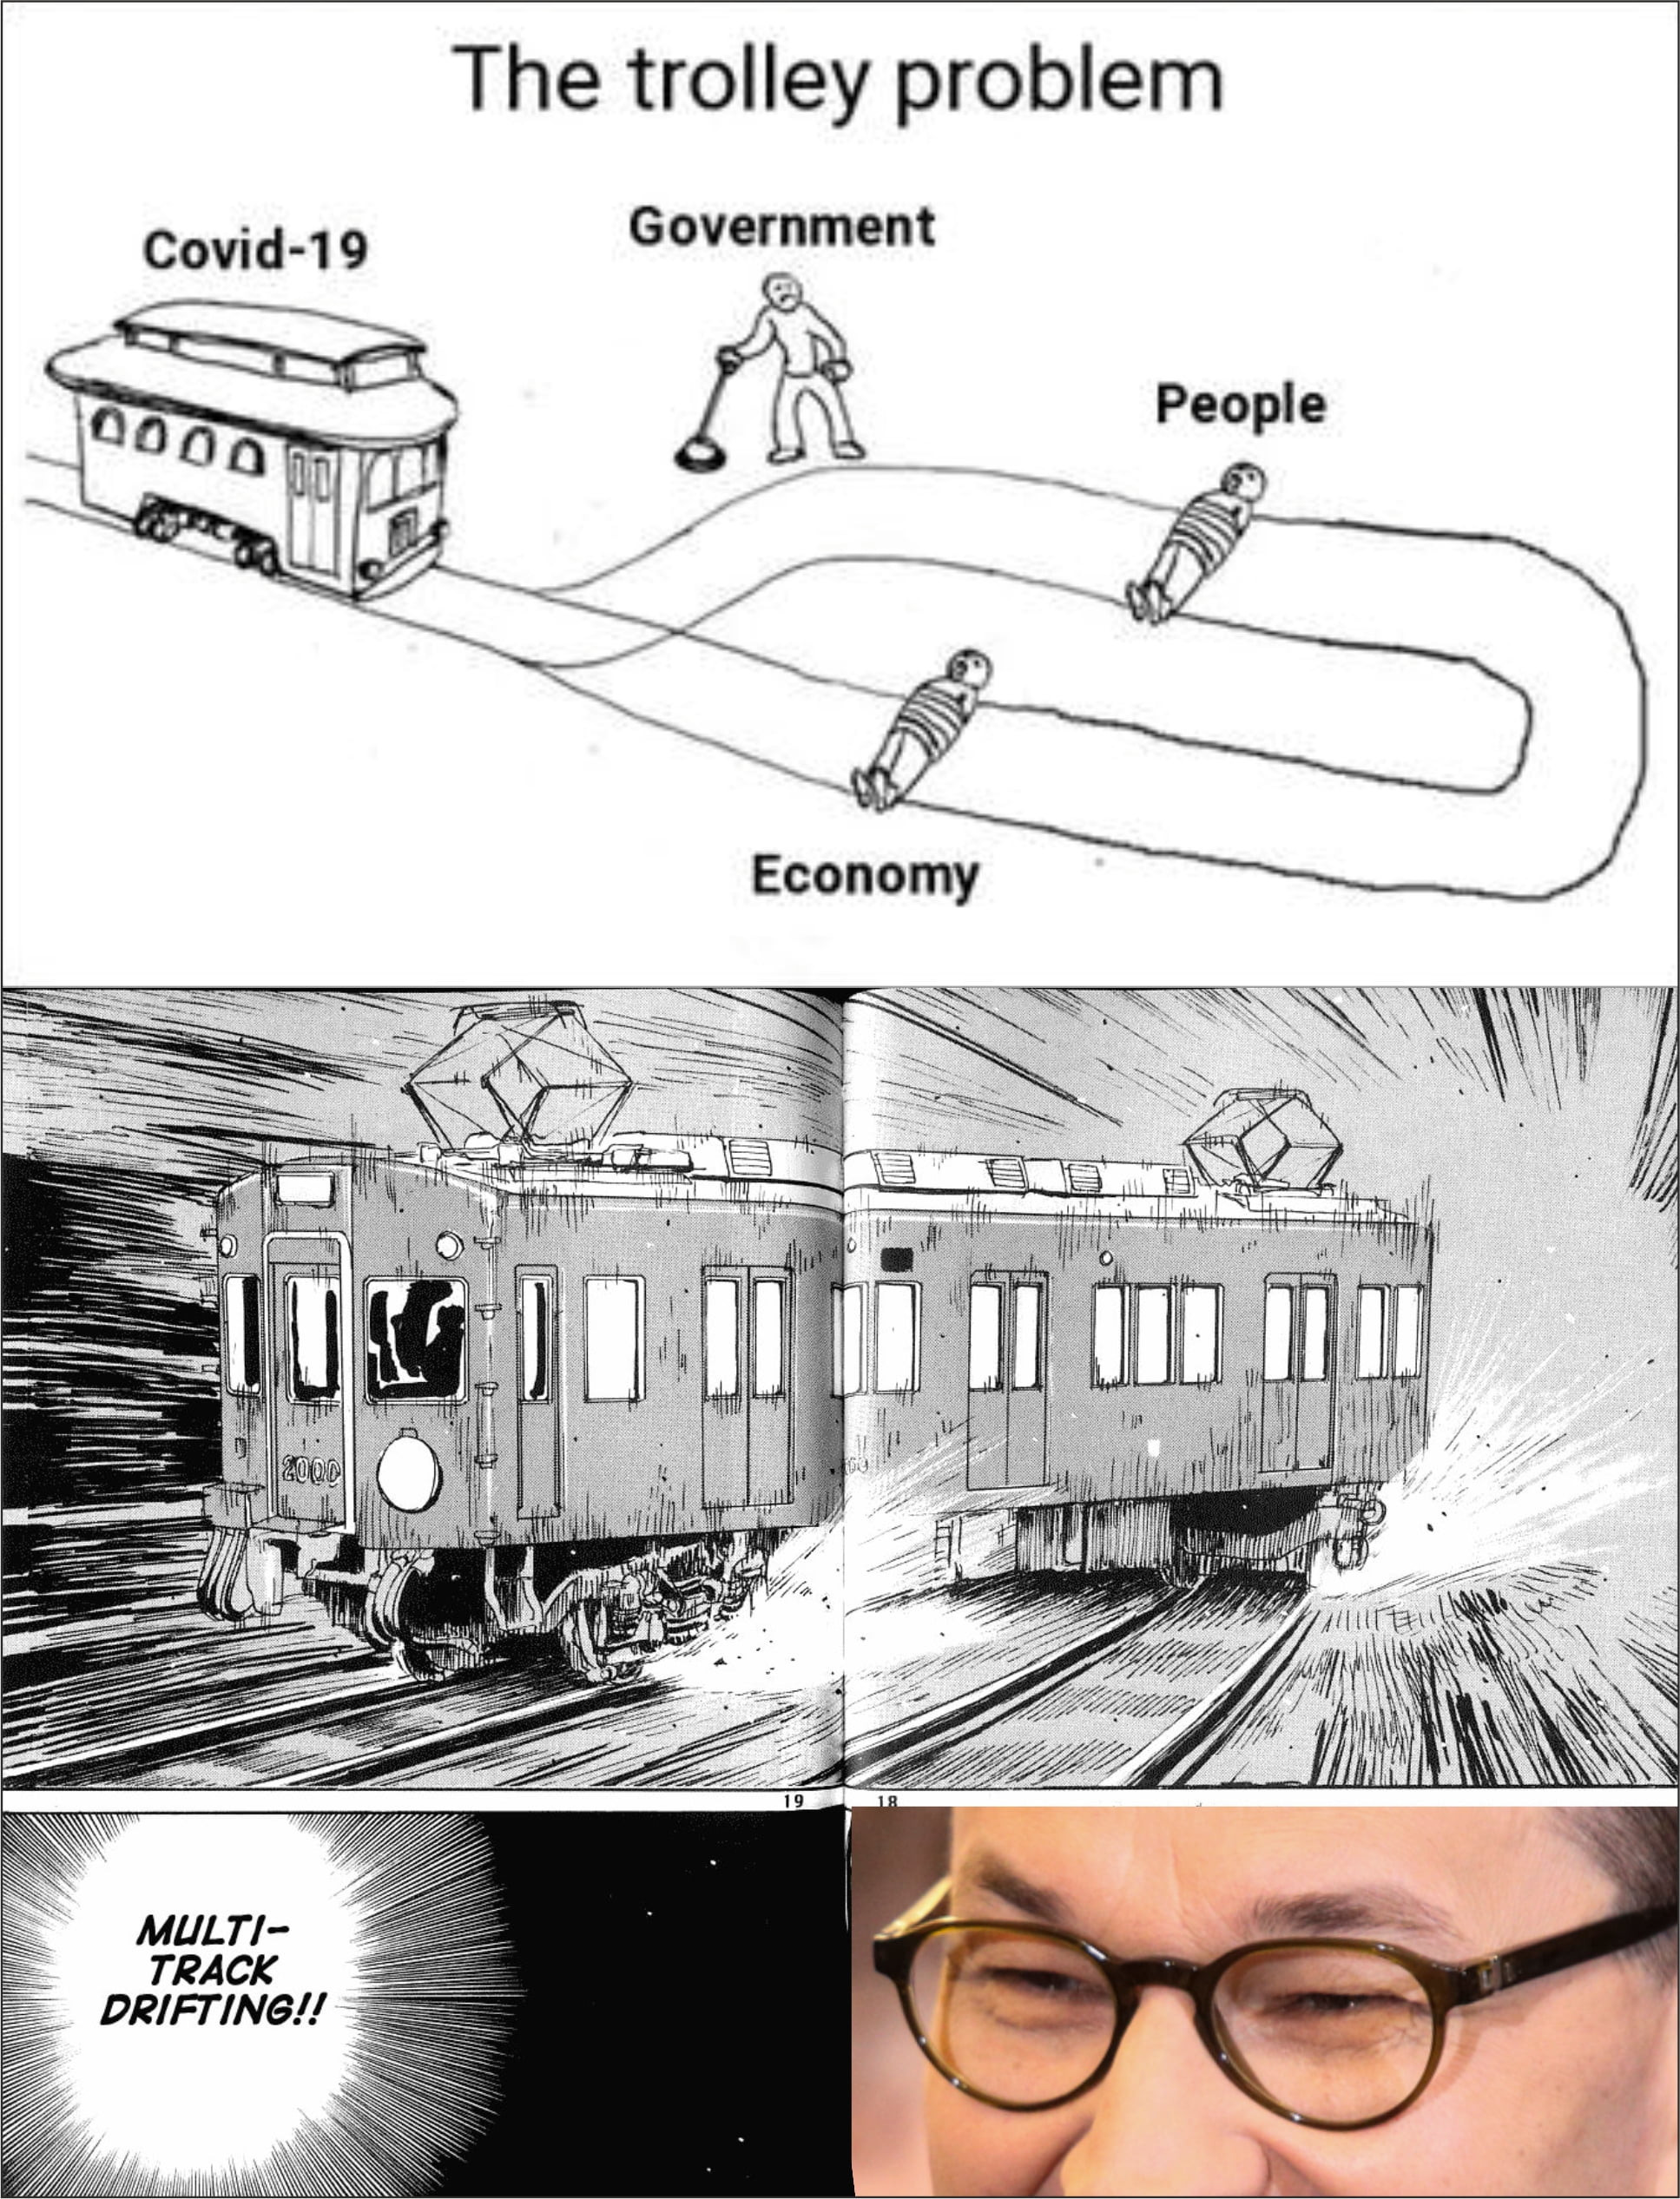 tee trolley problem government ﬁll i xw mufti   trac drift ing